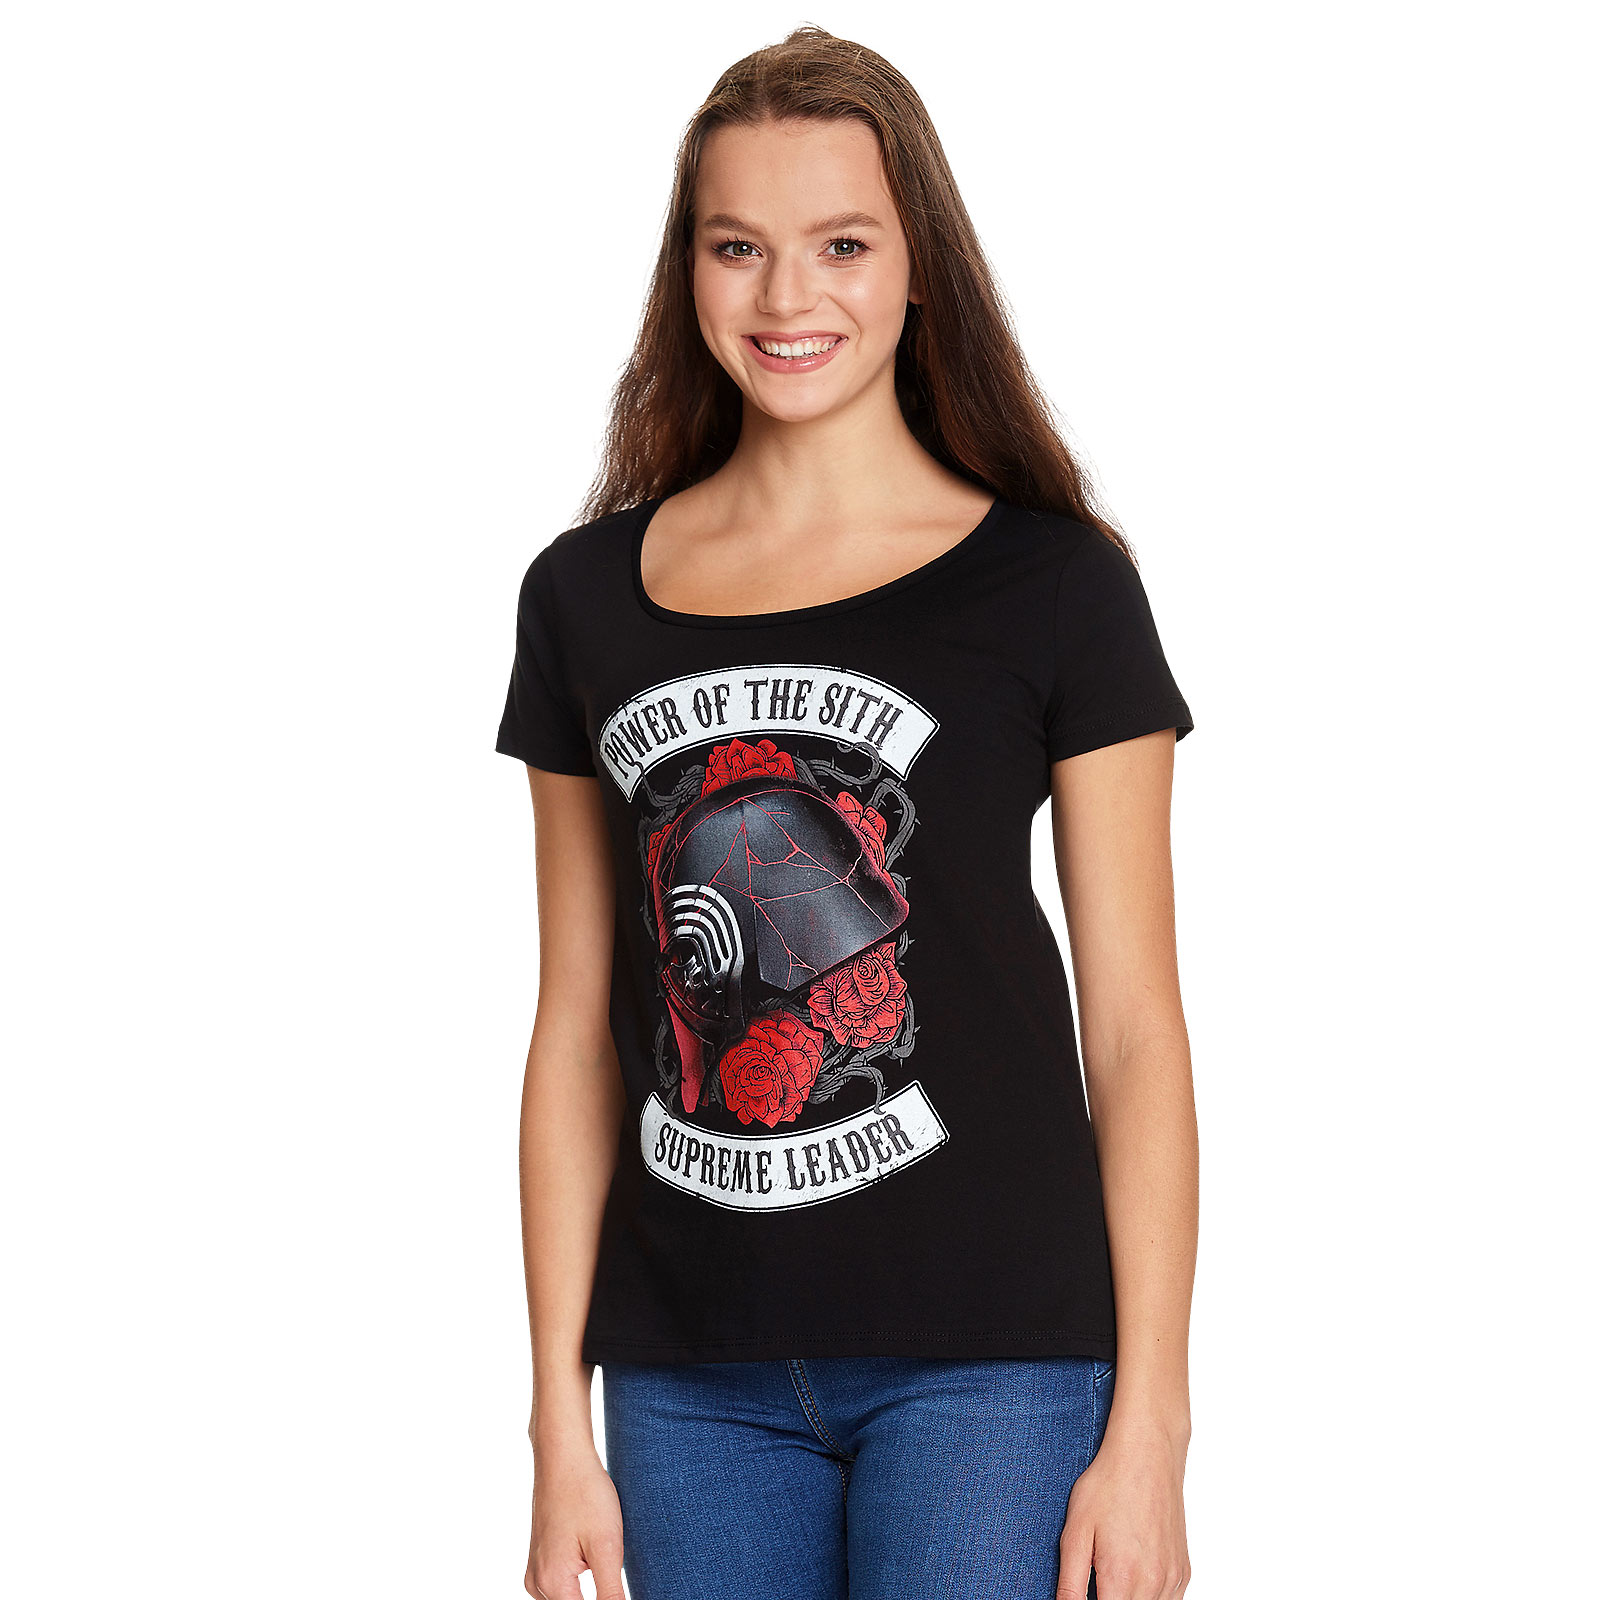 Star Wars - Power of the Sith Women's T-Shirt Black